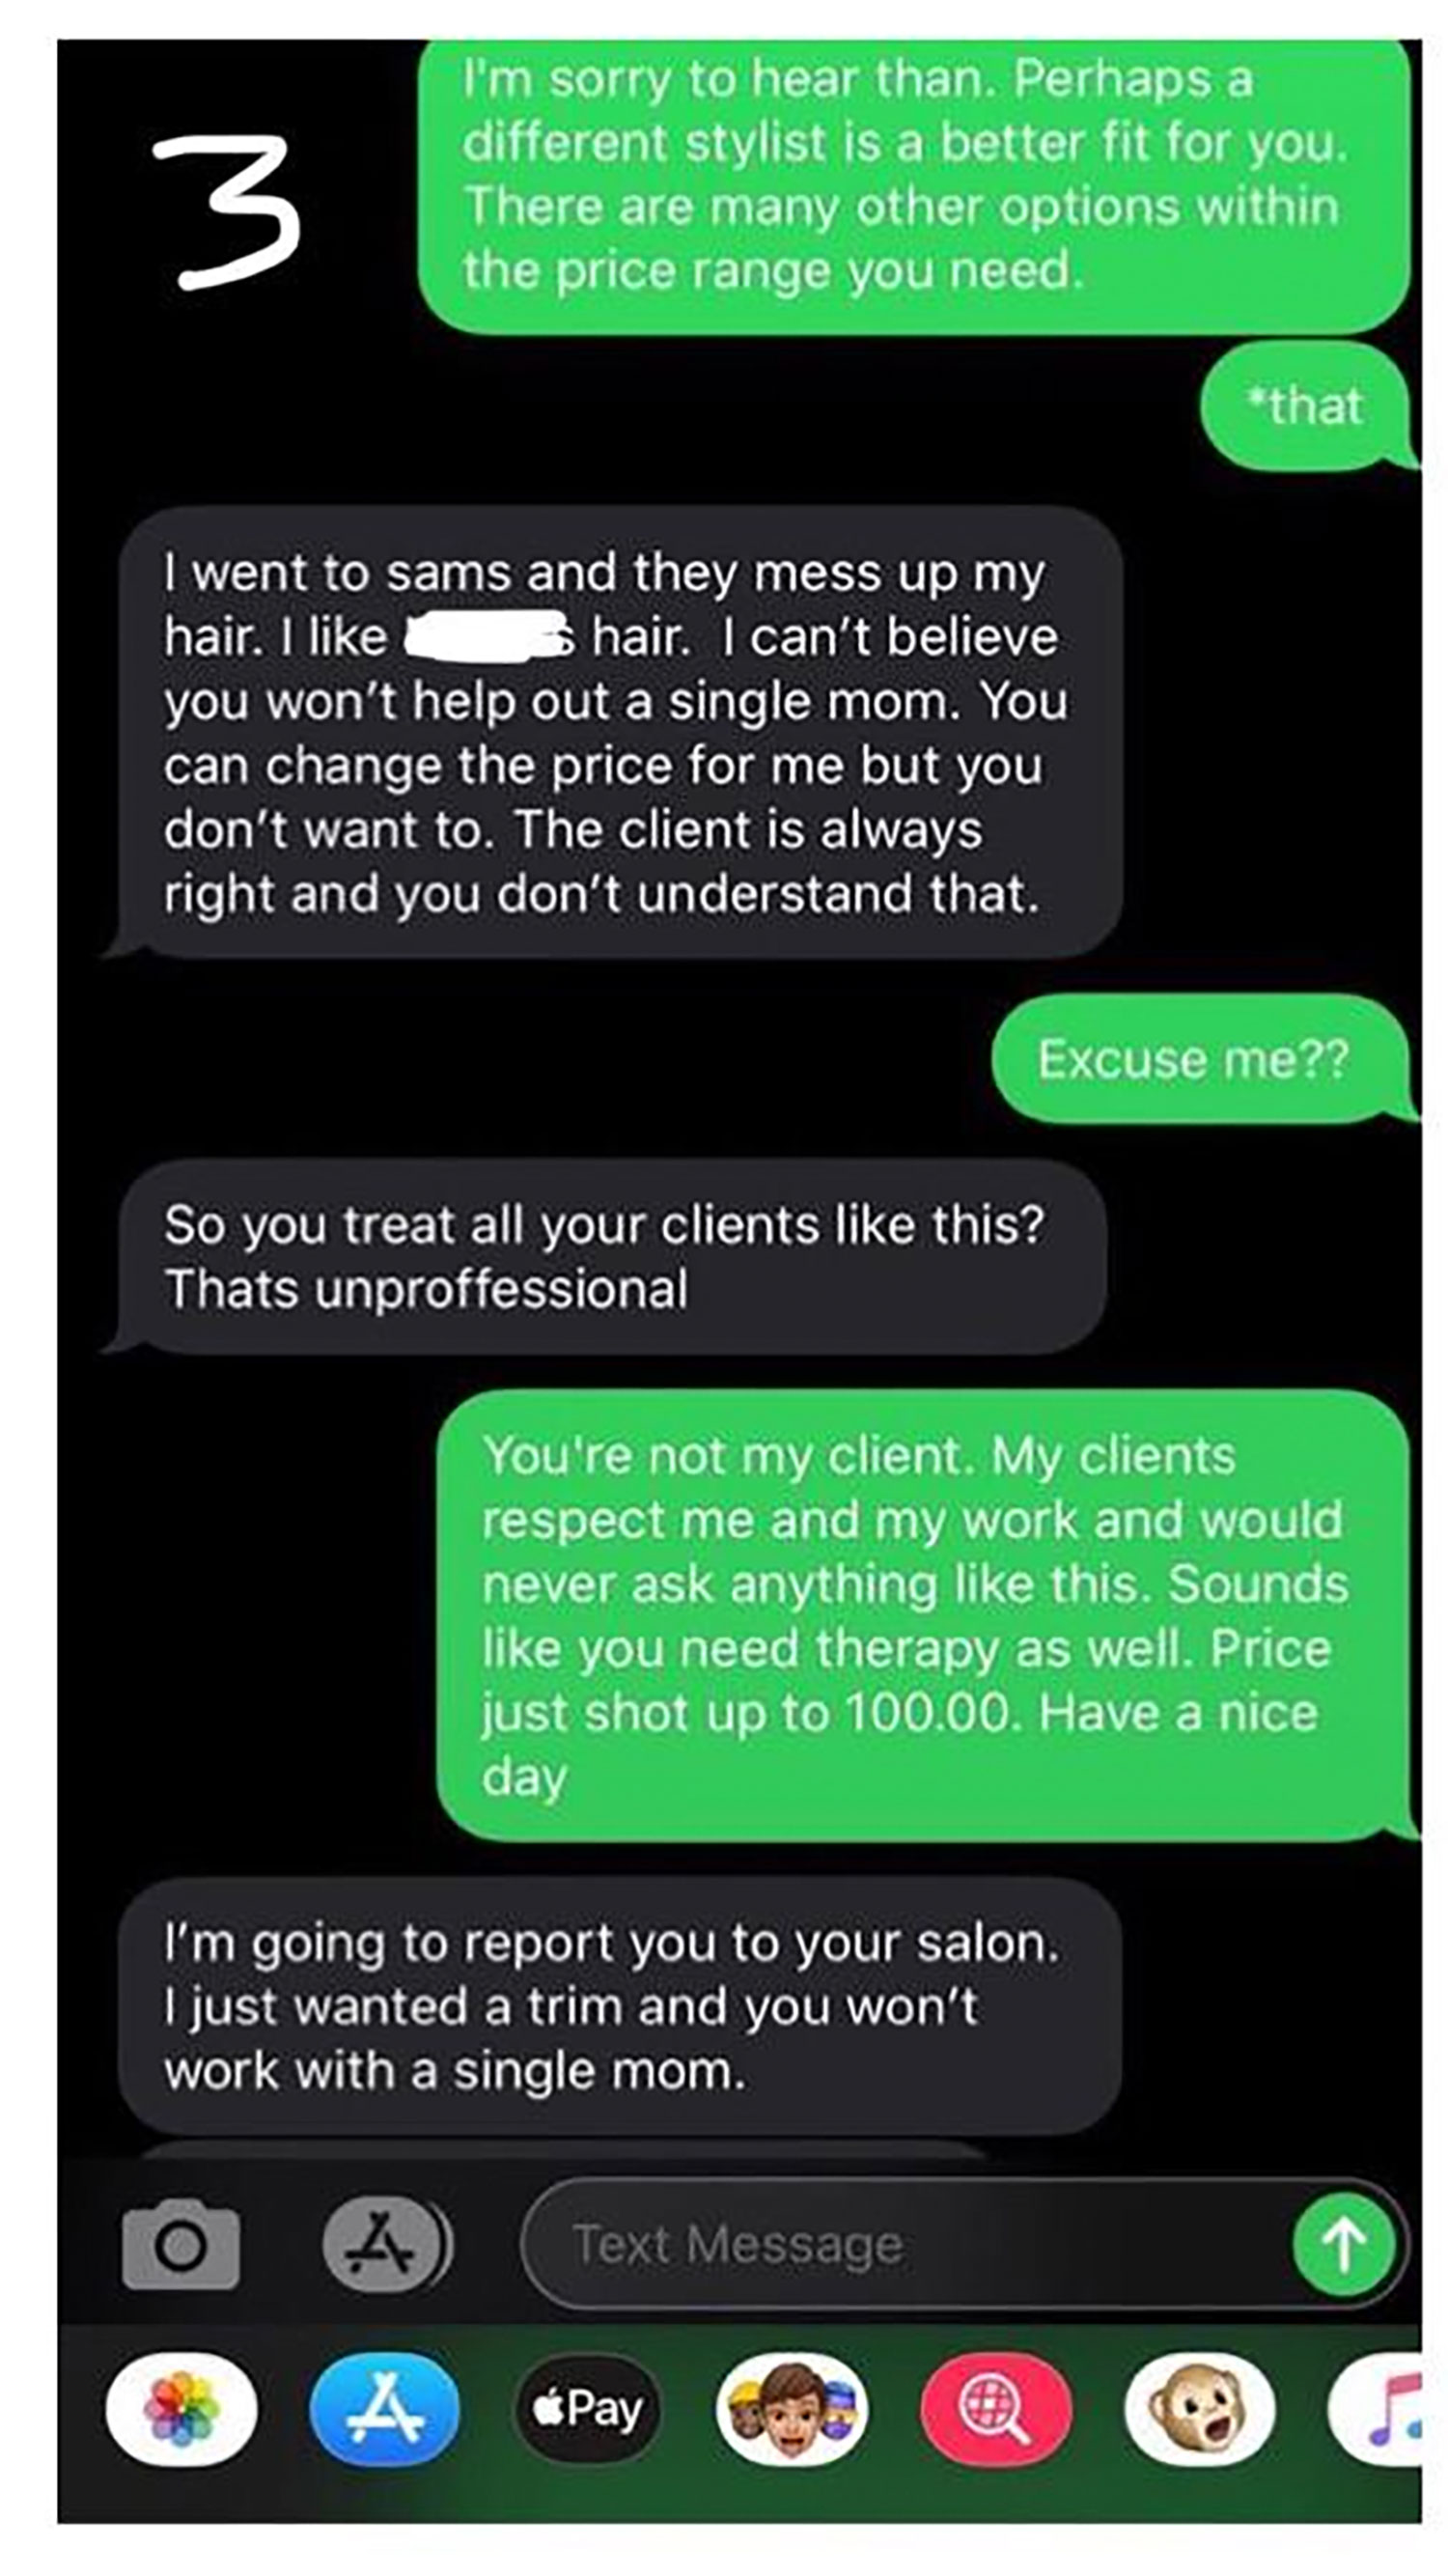 screenshot - I'm sorry to hear than. Perhaps a different stylist is a better fit for you. There are many other options within the price range you need. that I went to sams and they mess up my hair. I hair. I can't believe you won't help out a single mom. 